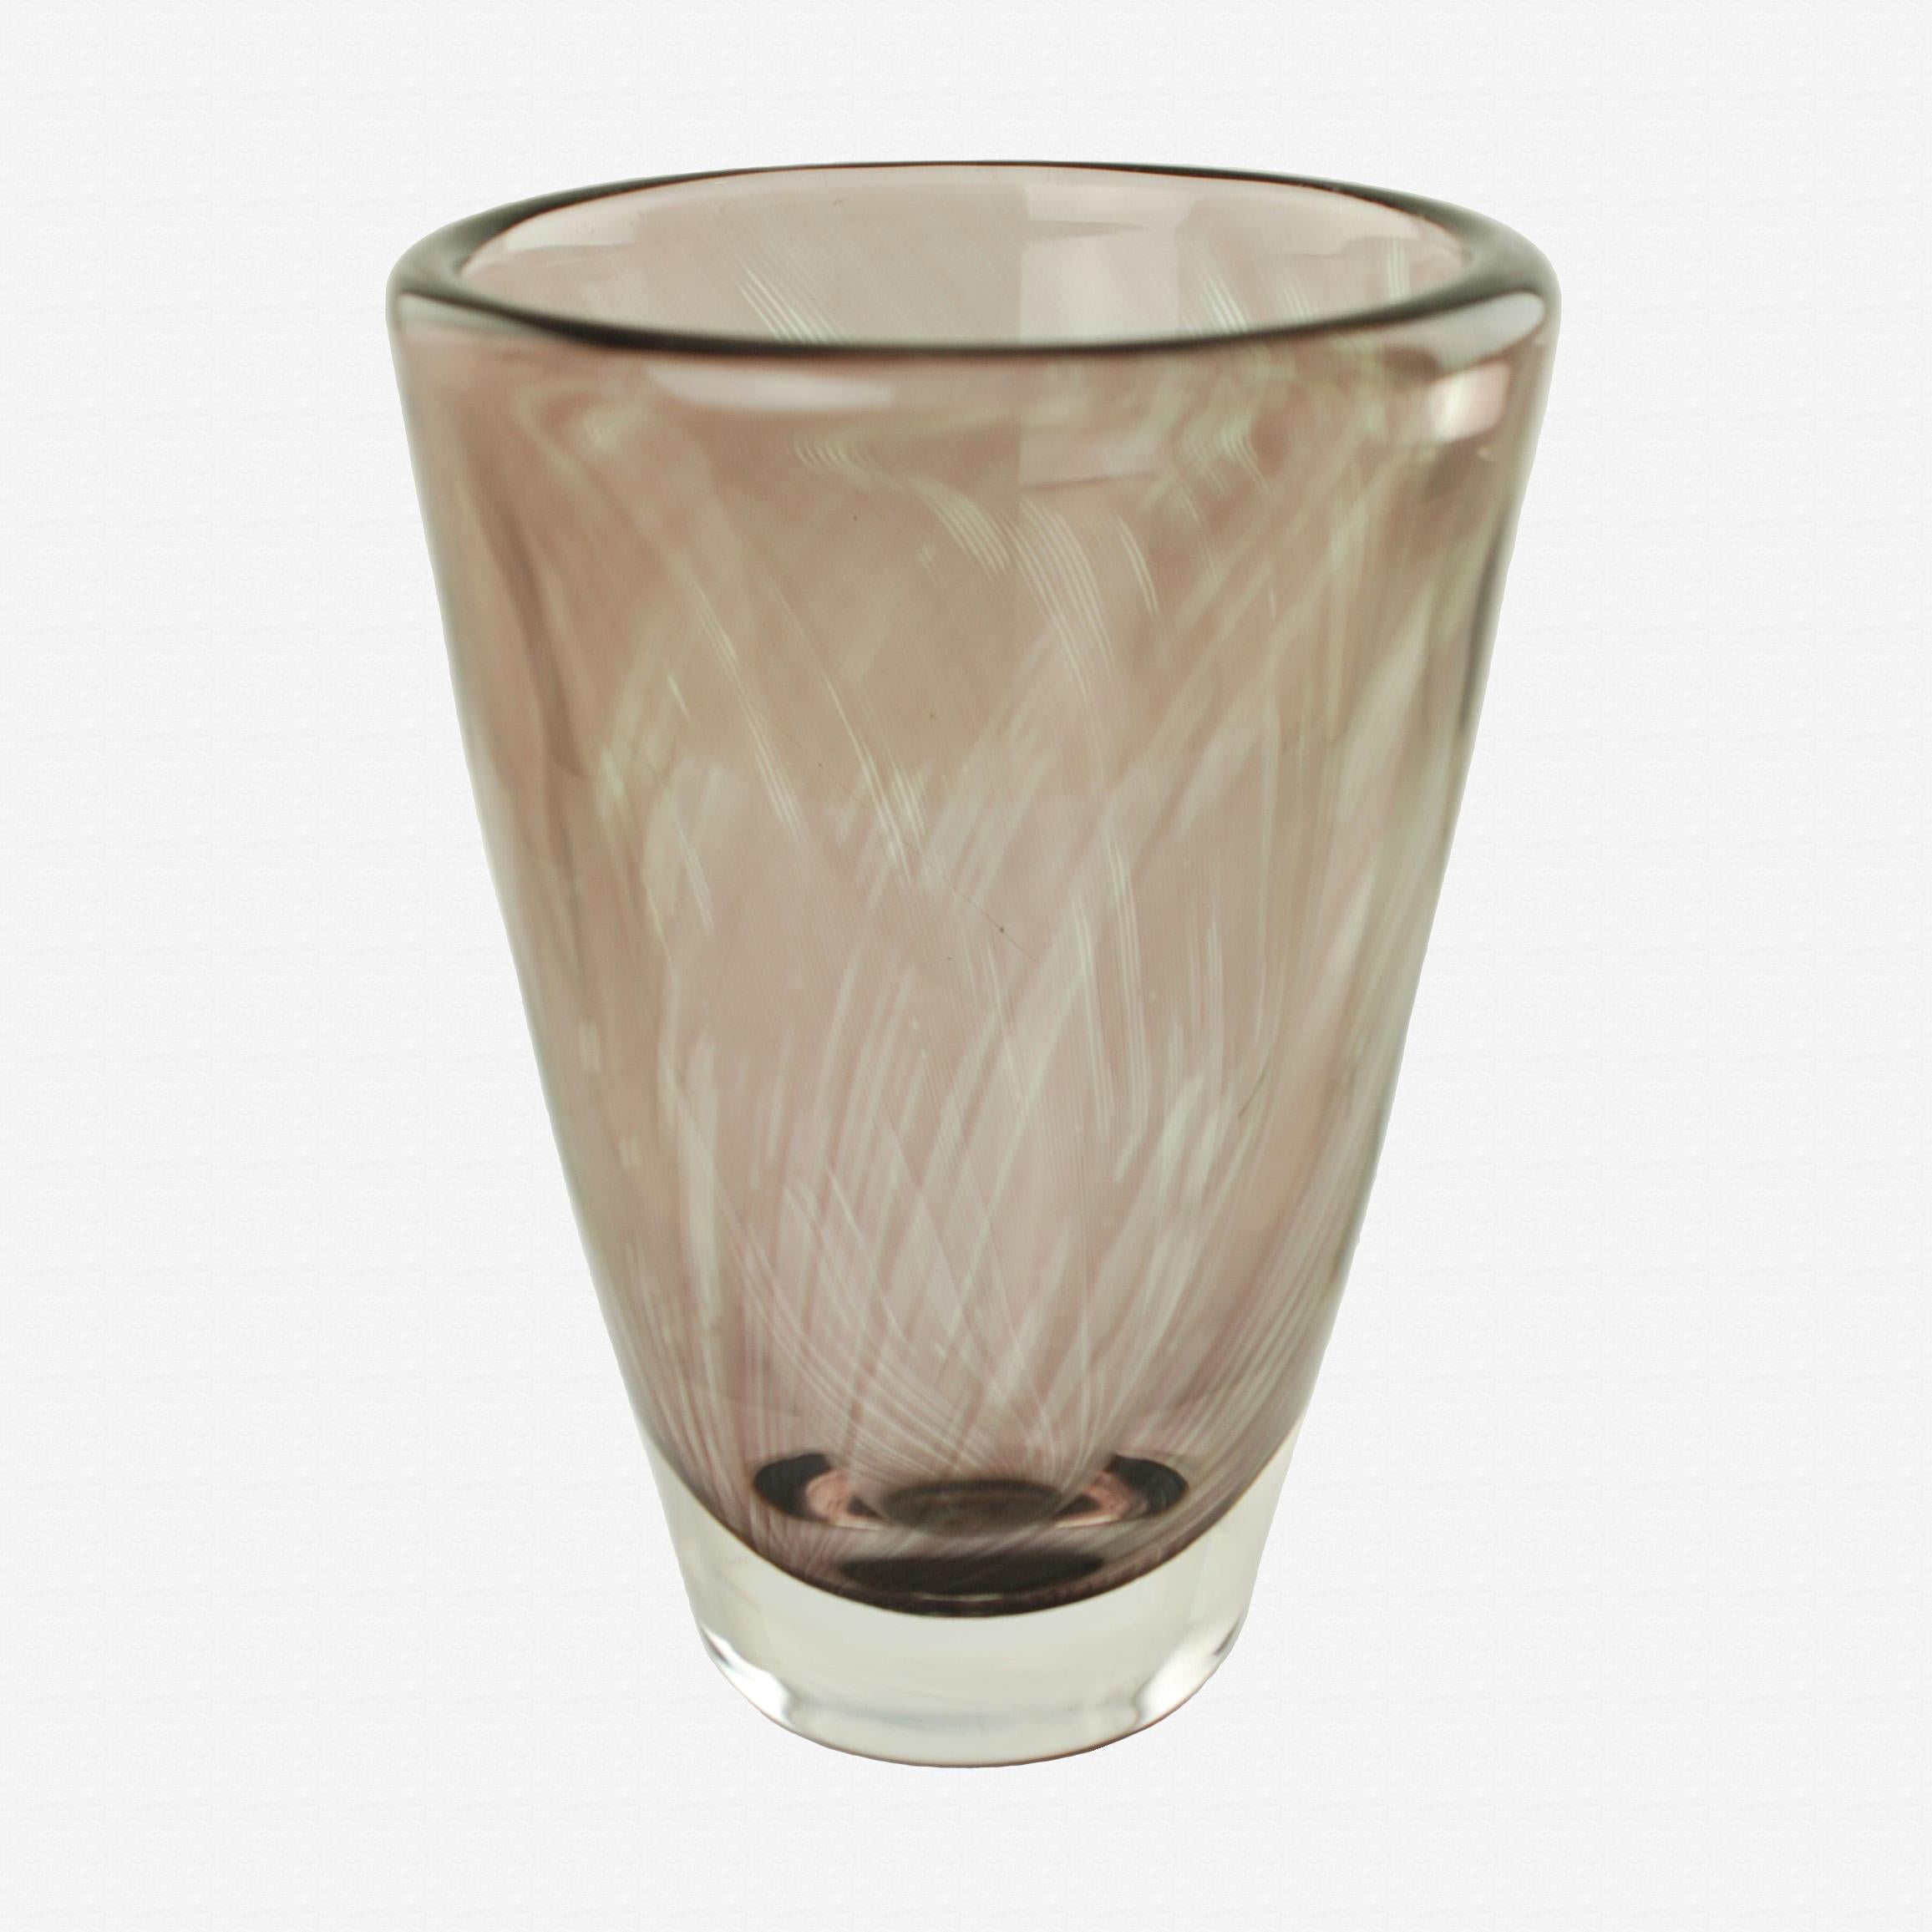 This heavy Orrefors Graal glass vase was designed by highly regarded Swedish designer Edvin Öhrström (1906–1994). The piece has a classic flared cylindrical shape and features a thick layer of clear glass over a smoky amethyst color. The 5lb 8oz